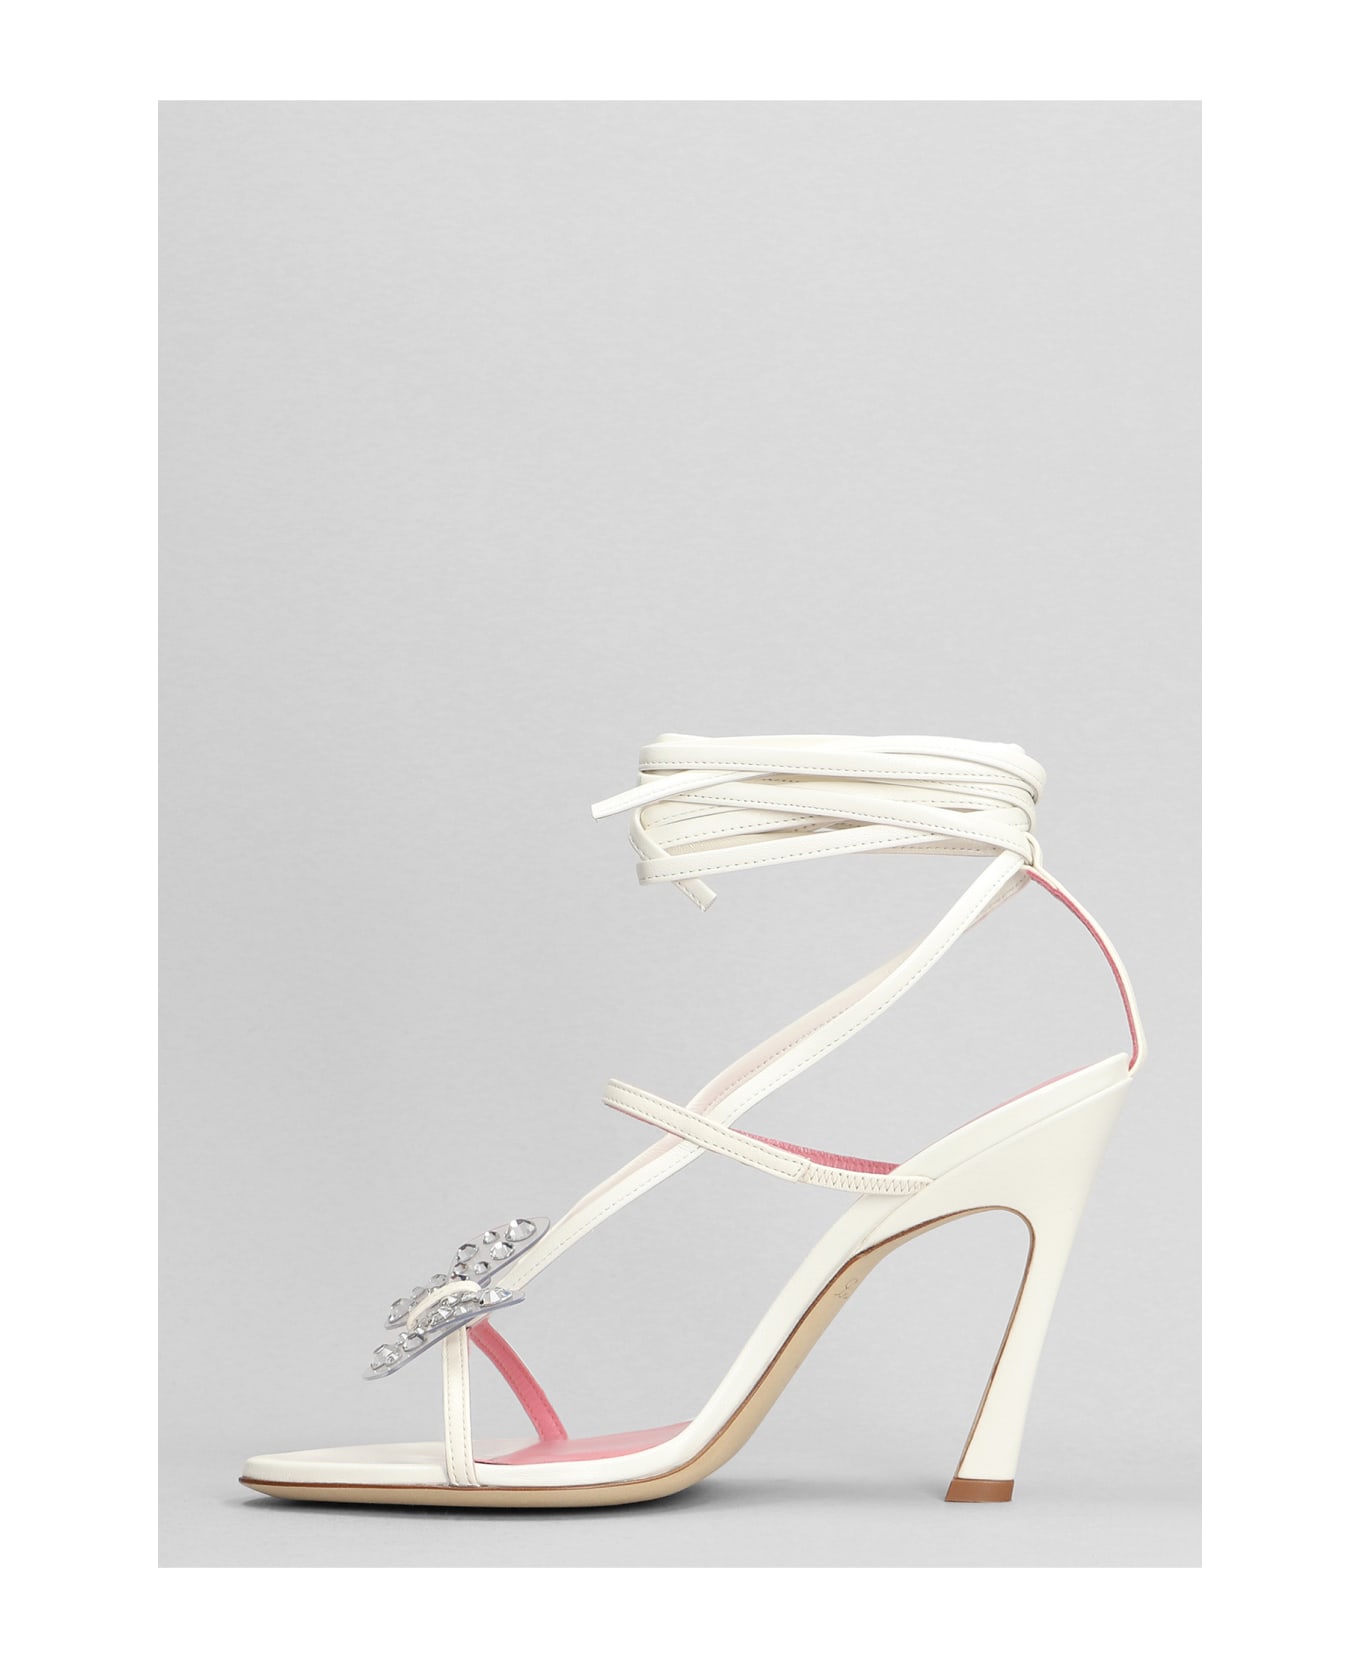 Blumarine Butterfly 111 Sandals In White Leather - white